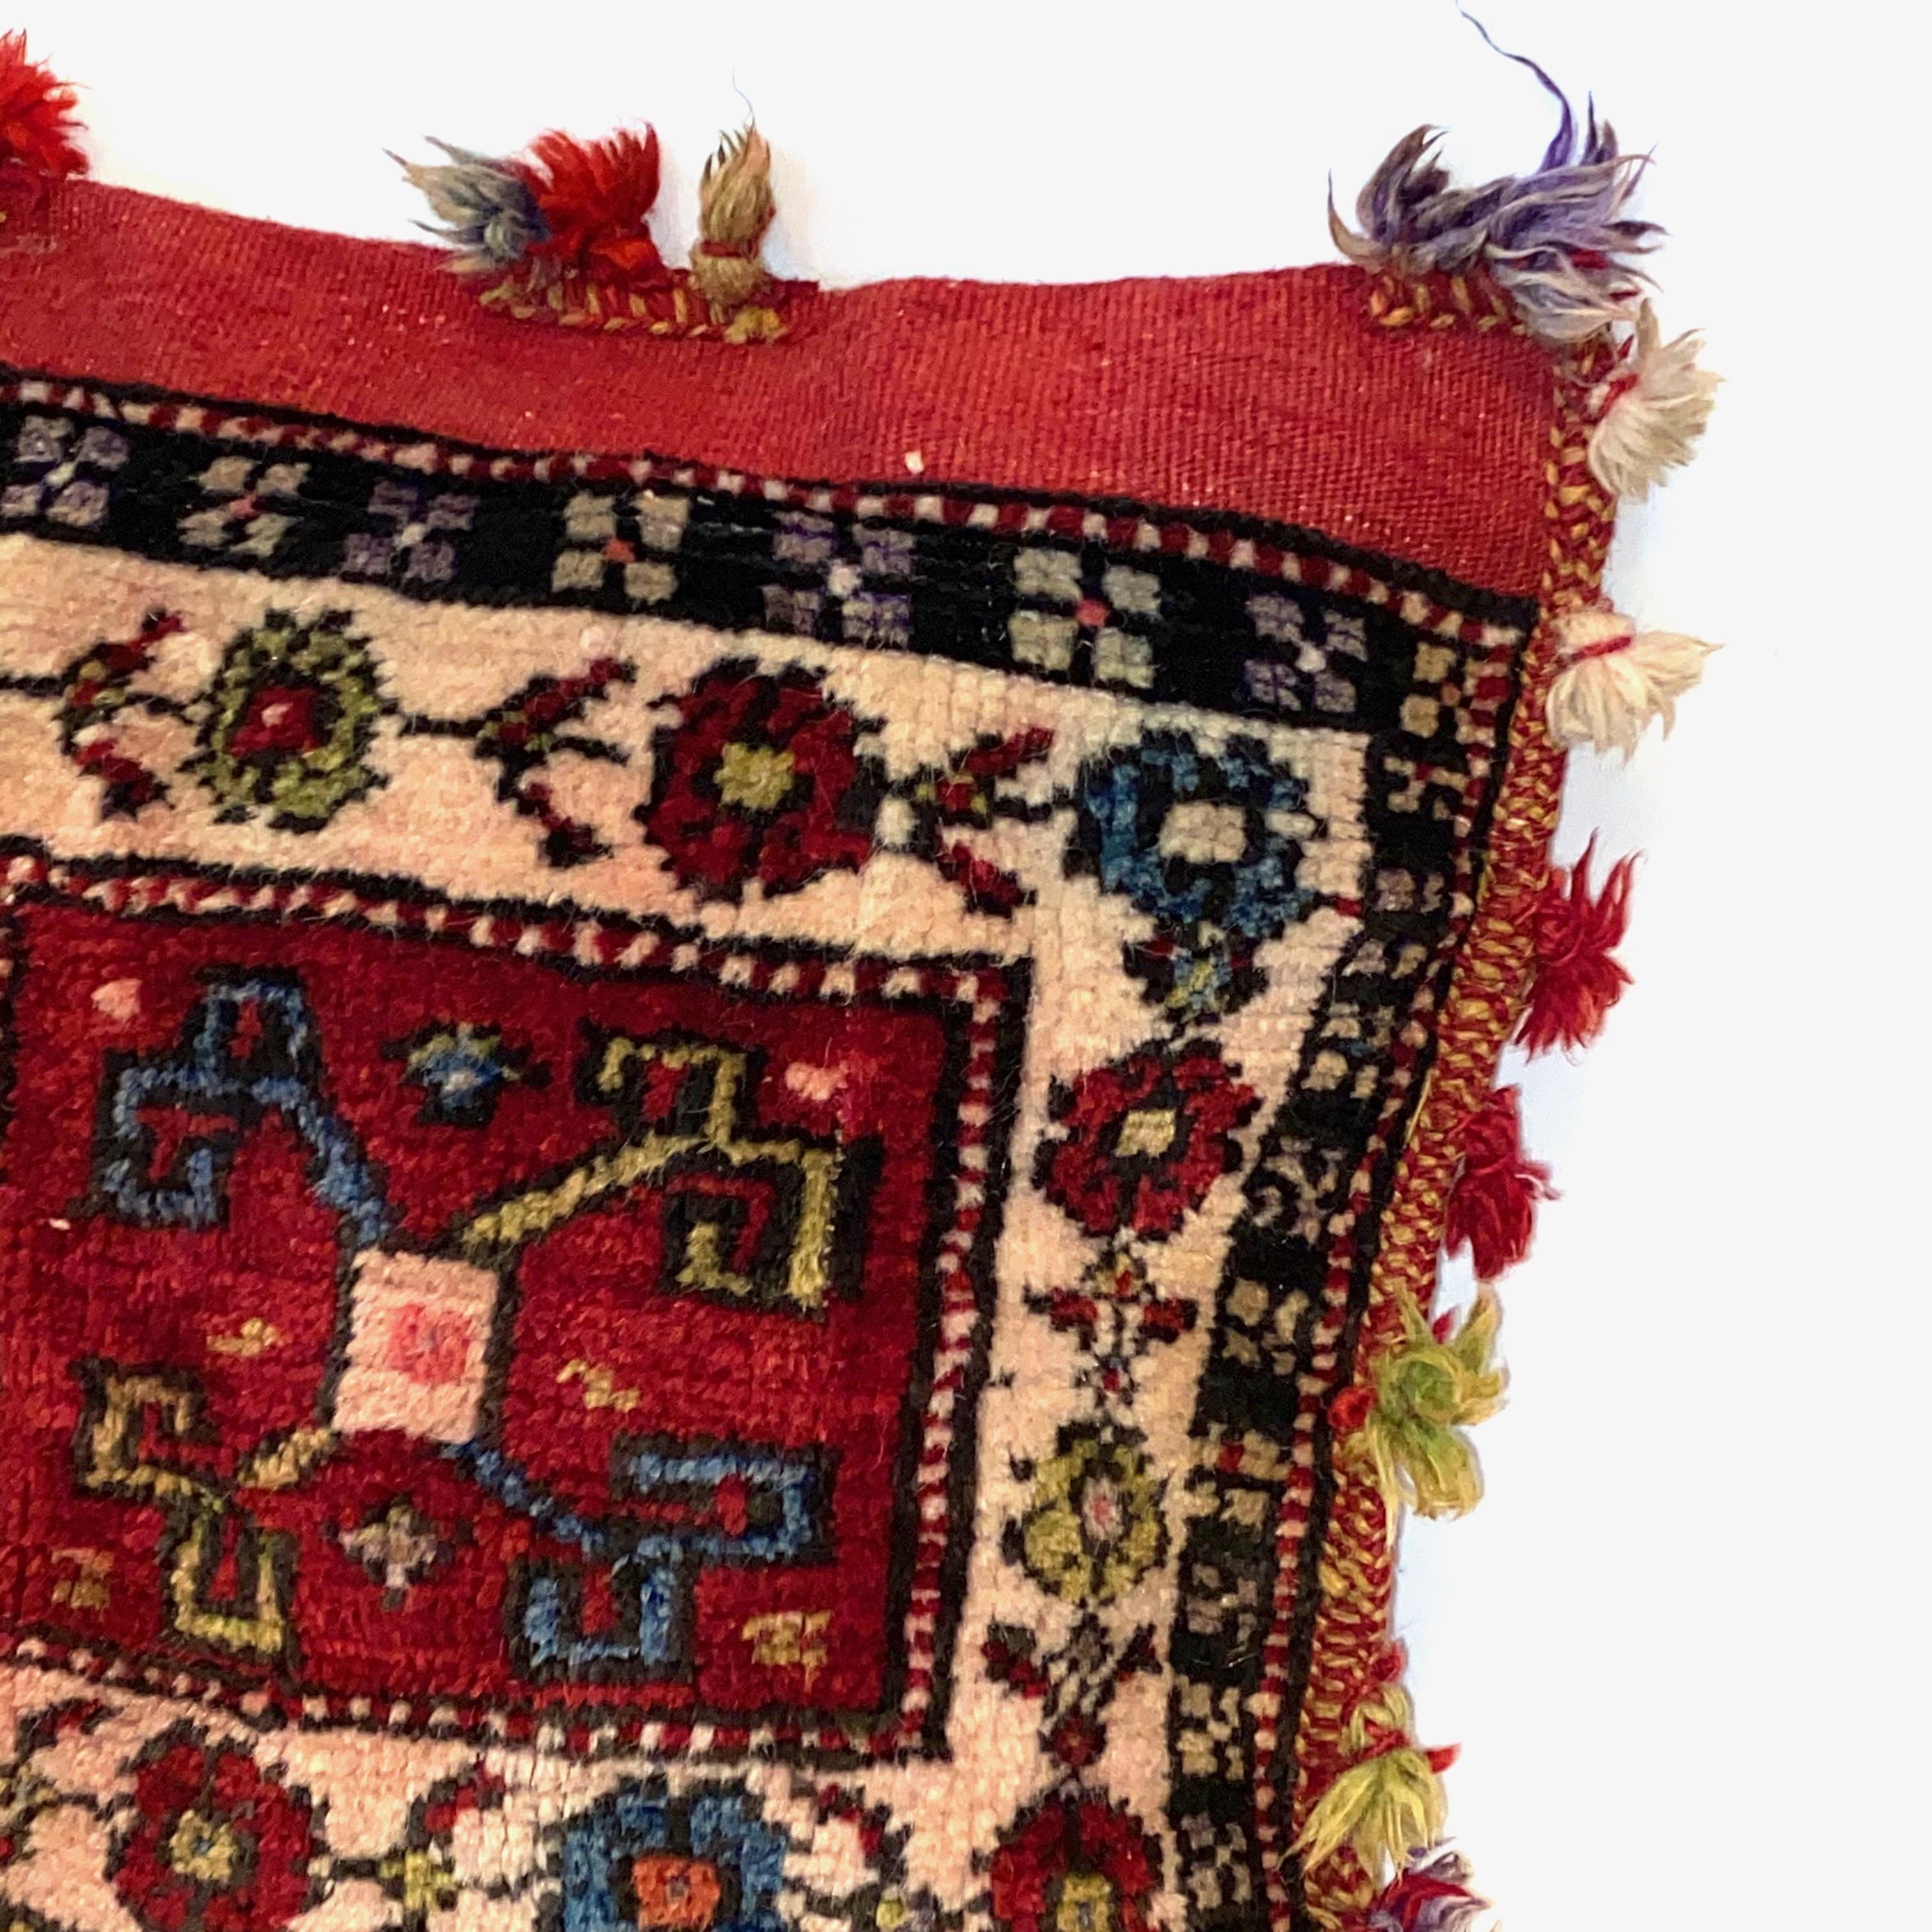 Gorgeous Arabian oriental pillow. Handmade of a woolen salt bag or Oriental rug. It measures approximate: 16 3/4 inch high, is approximate 16